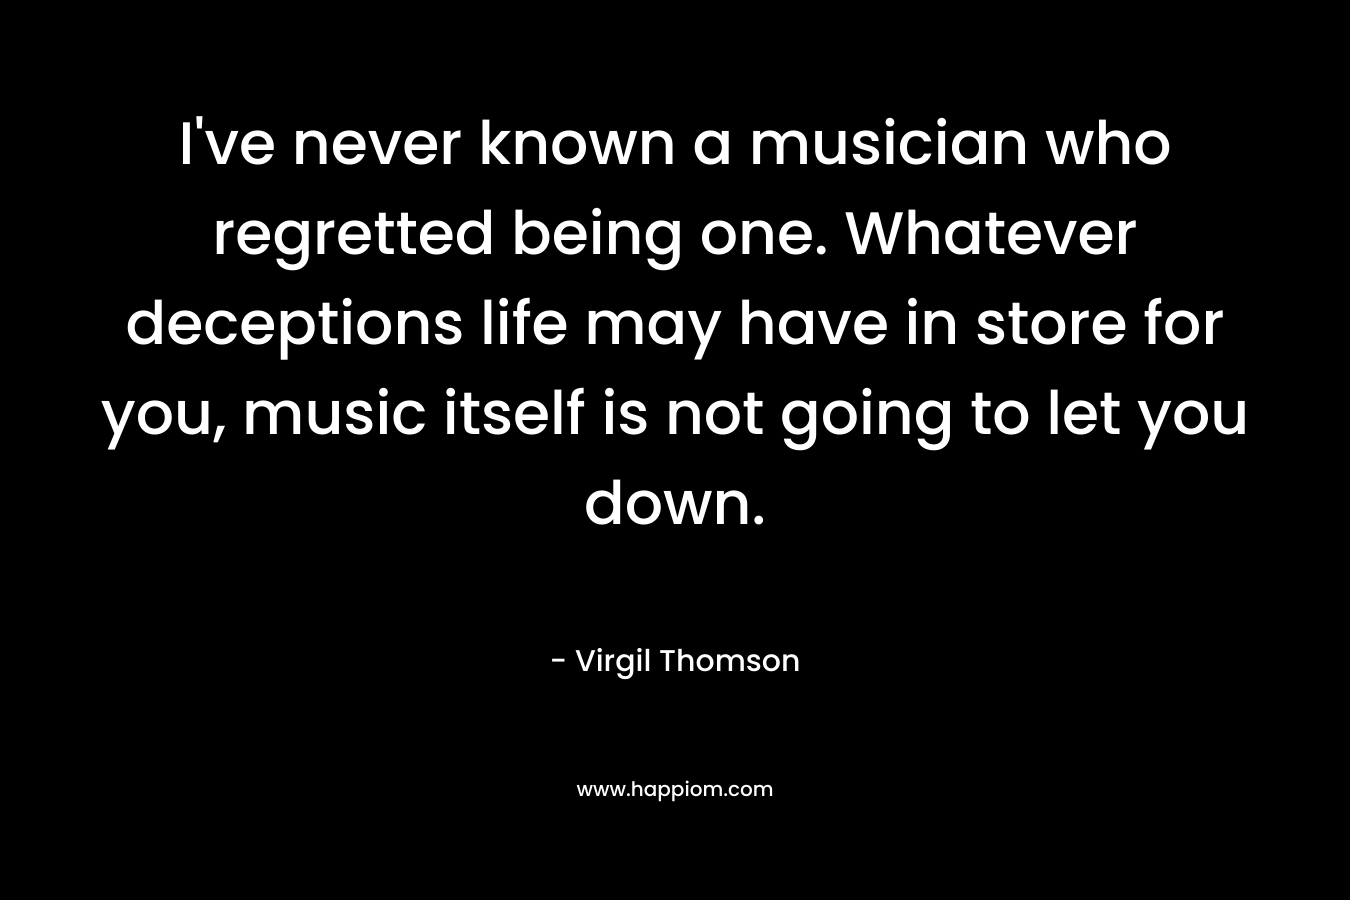 I've never known a musician who regretted being one. Whatever deceptions life may have in store for you, music itself is not going to let you down.